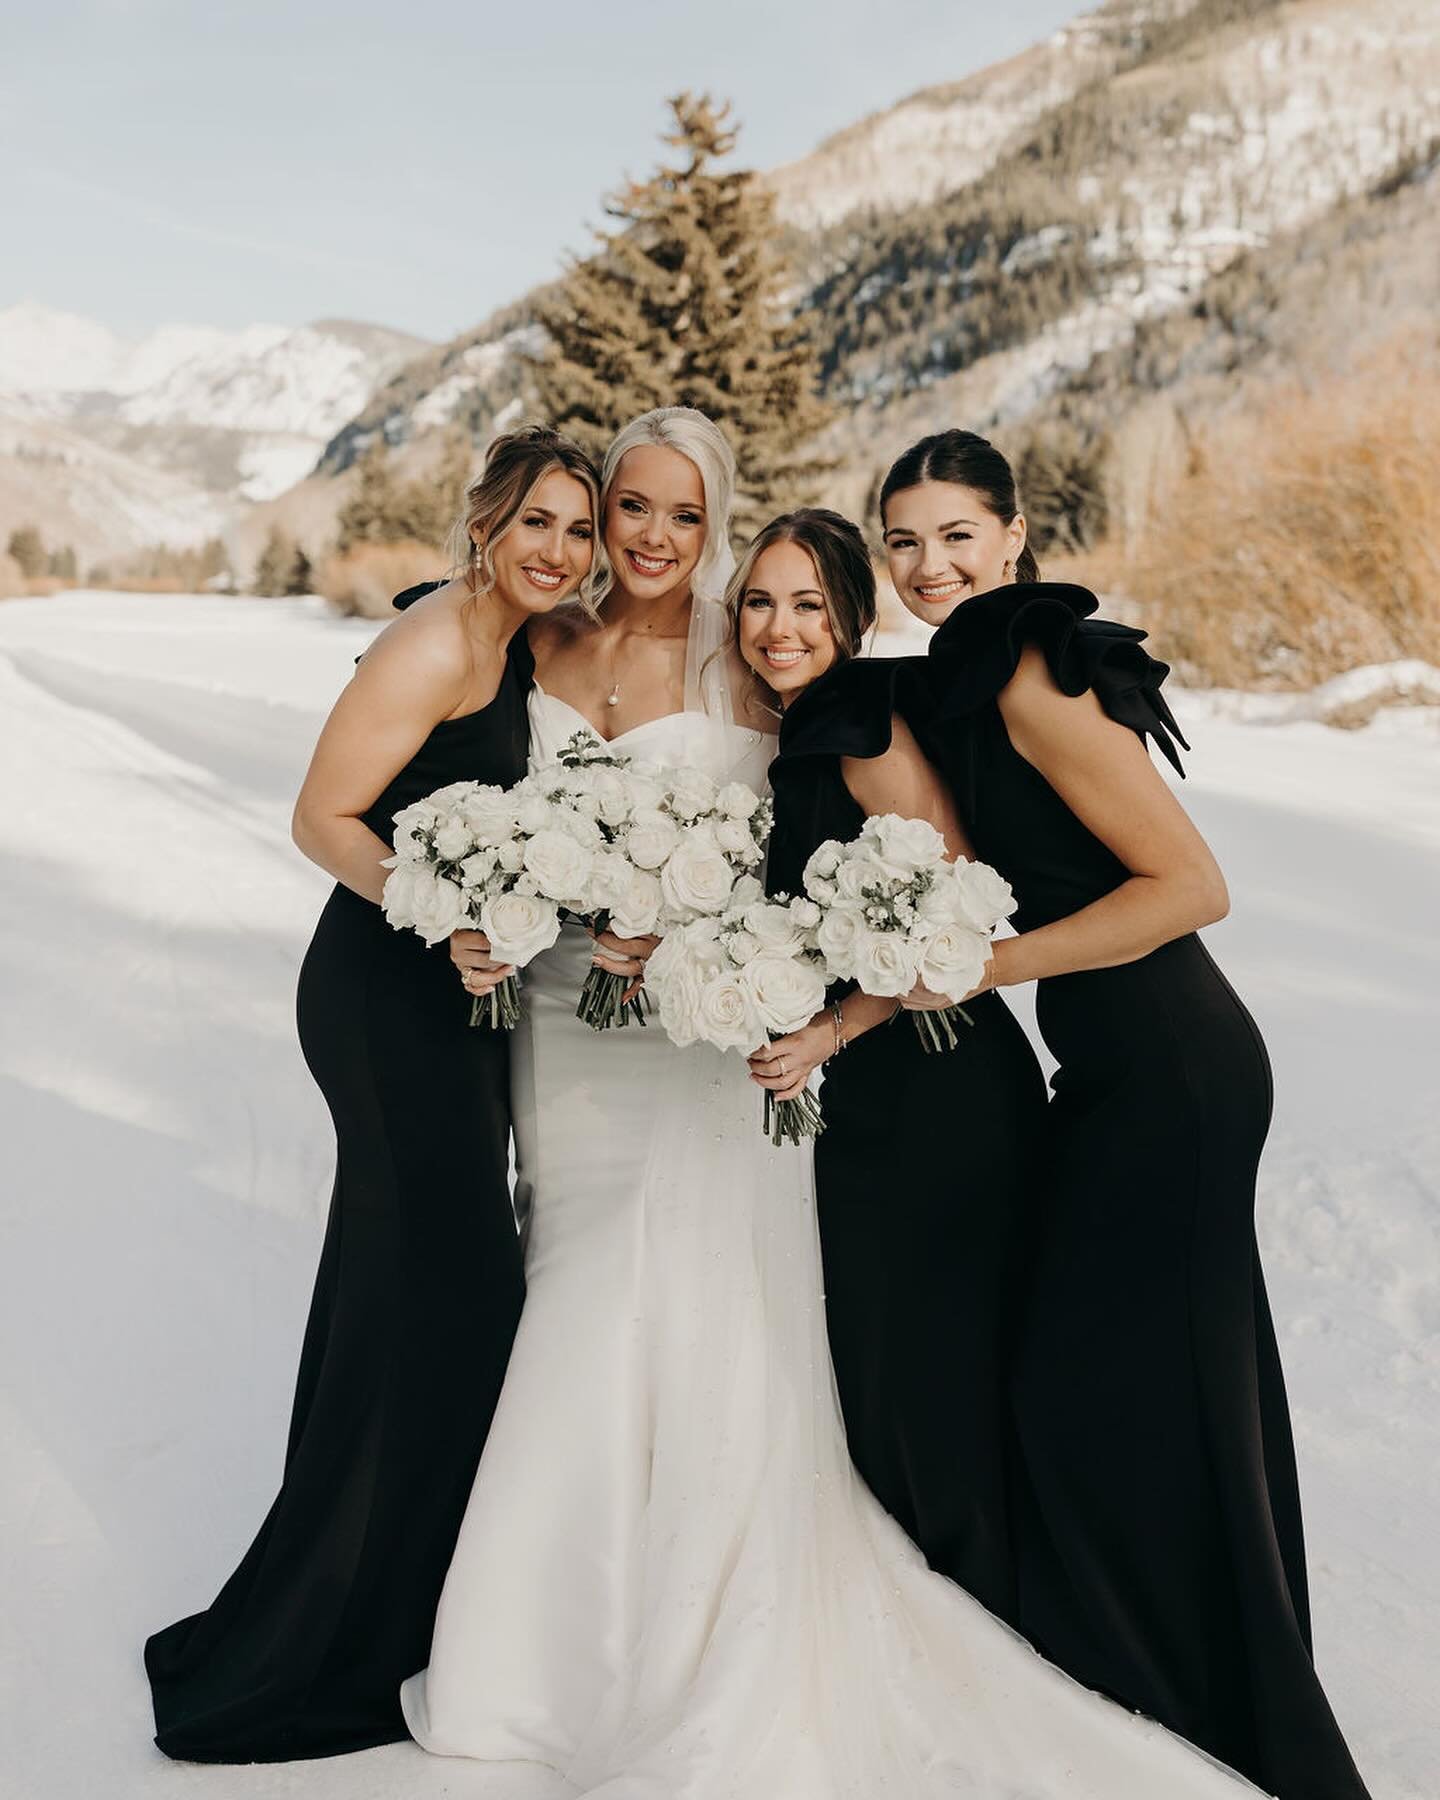 Definitely not missing winter but in love with these details from K+S&rsquo;s intimate winter wedding at @fsvail - @littlevalleyweddings transformed their space perfectly! 📷: @threebirdsphotography